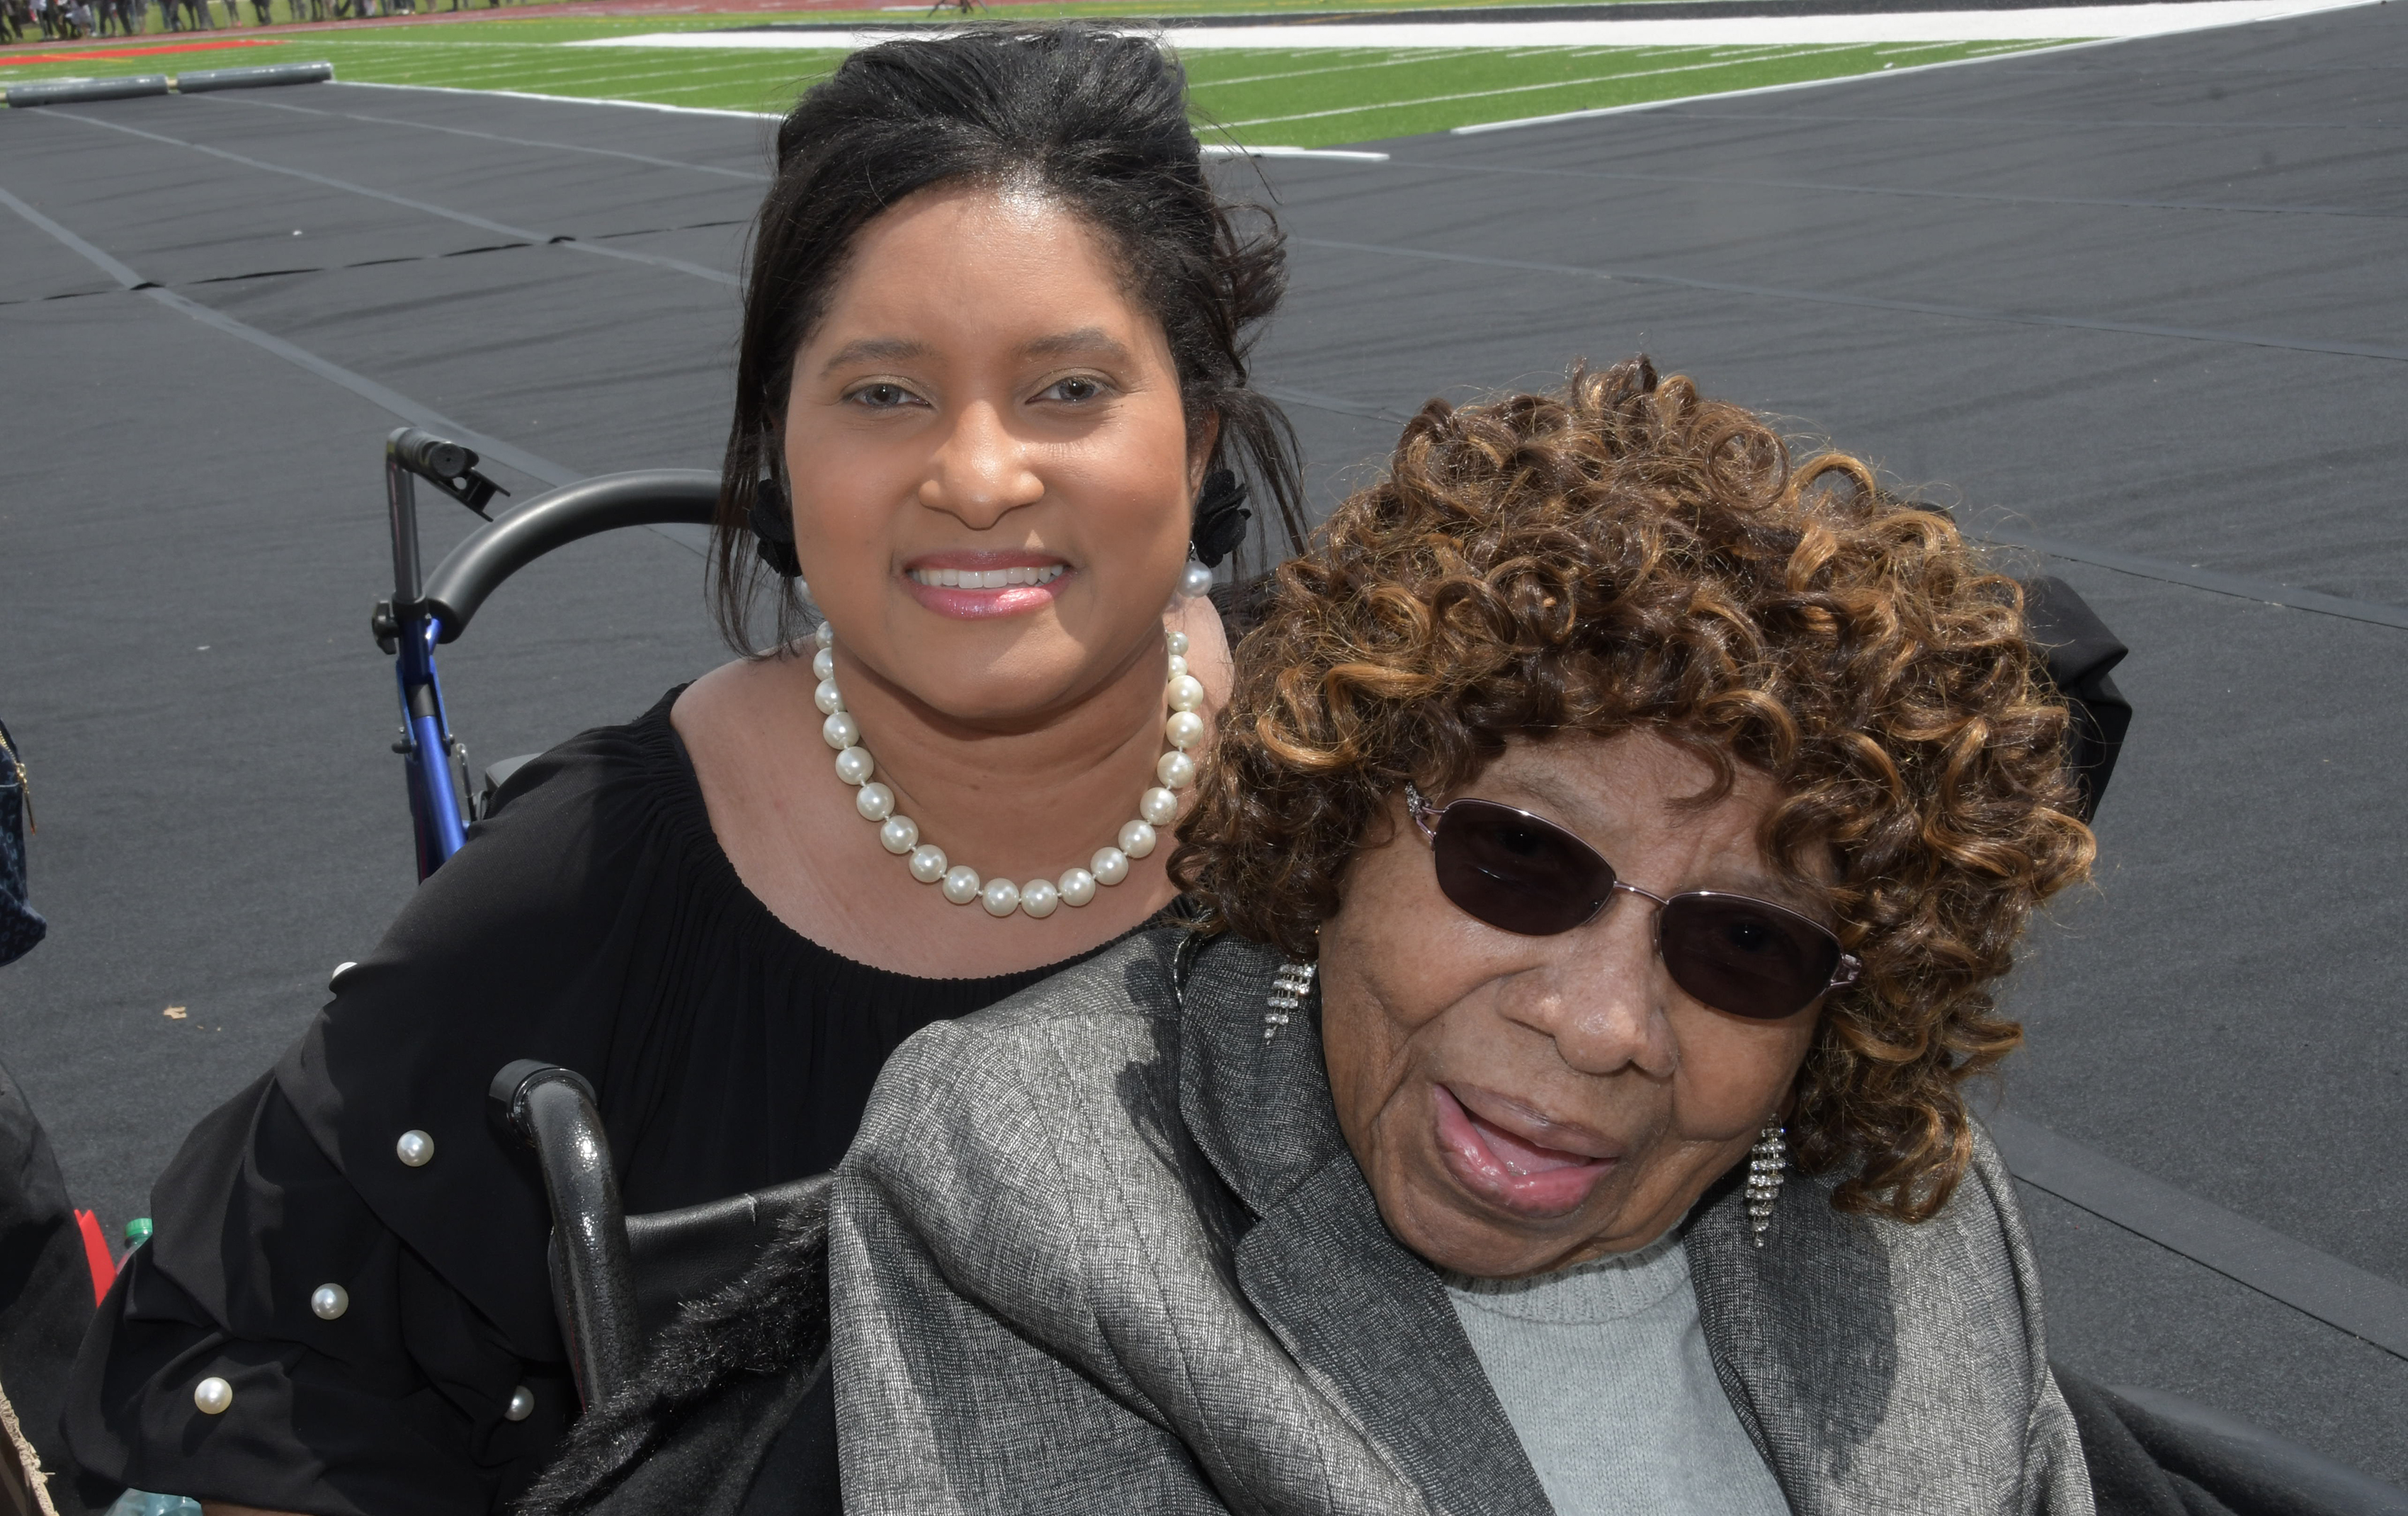 Courtney Stevenson (r) celebrated her 106th birthday on June 12. Shown here with a sorority sister Marquita Thomas Brown at the 2019 May Commencement, Mrs. Stevenson continues to be the University's oldest living among the host of Del State alumni